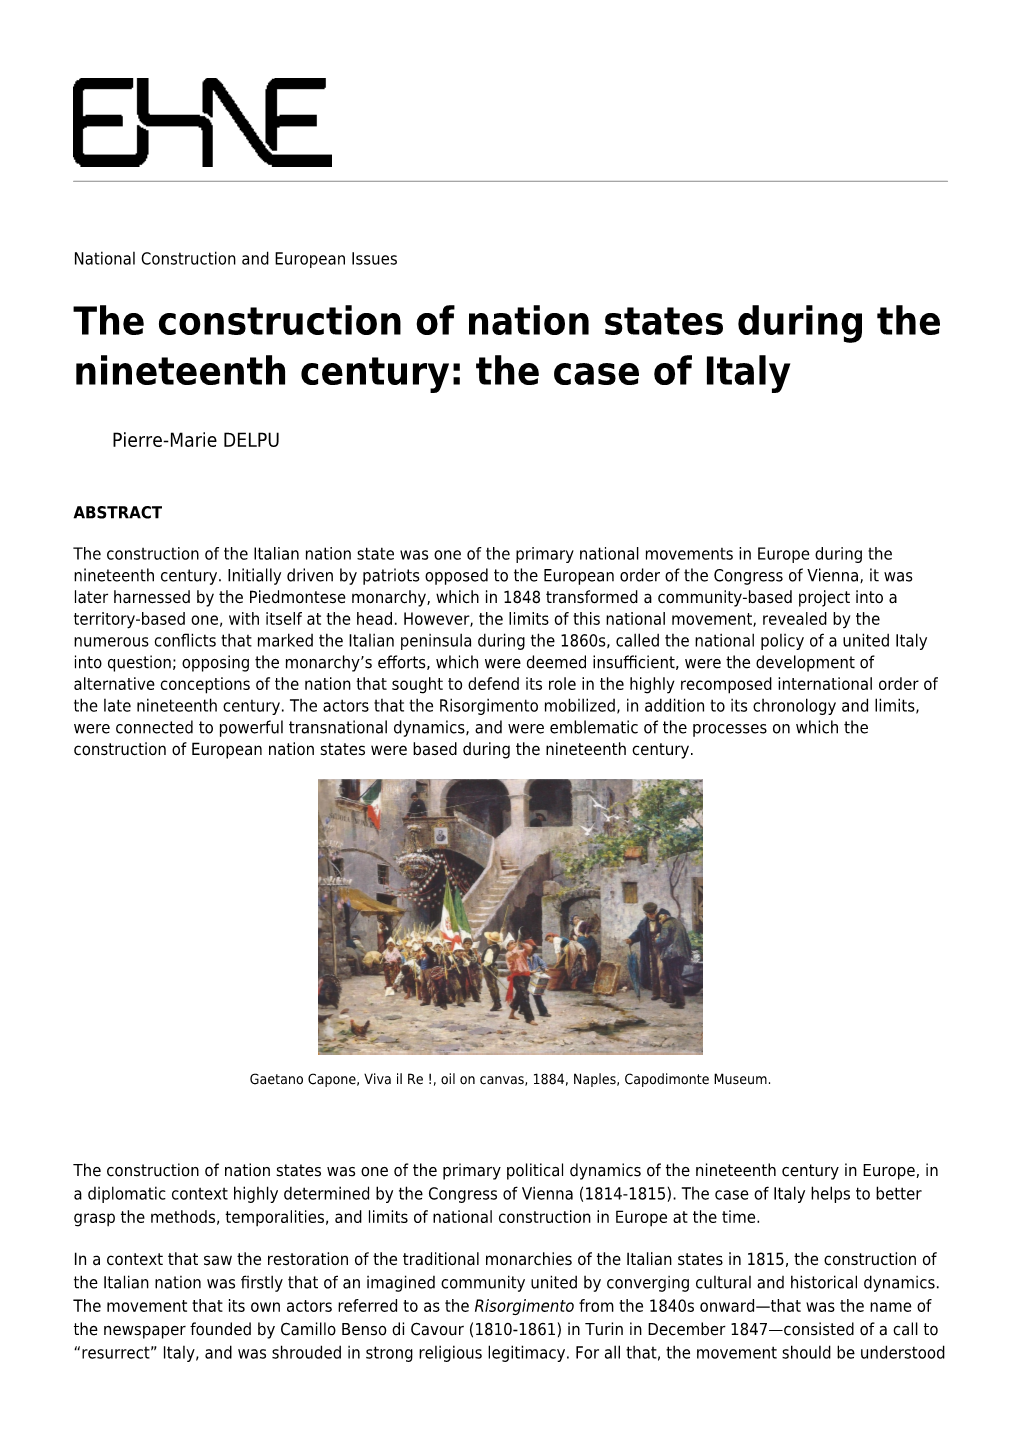 The Construction of Nation States During the Nineteenth Century: the Case of Italy